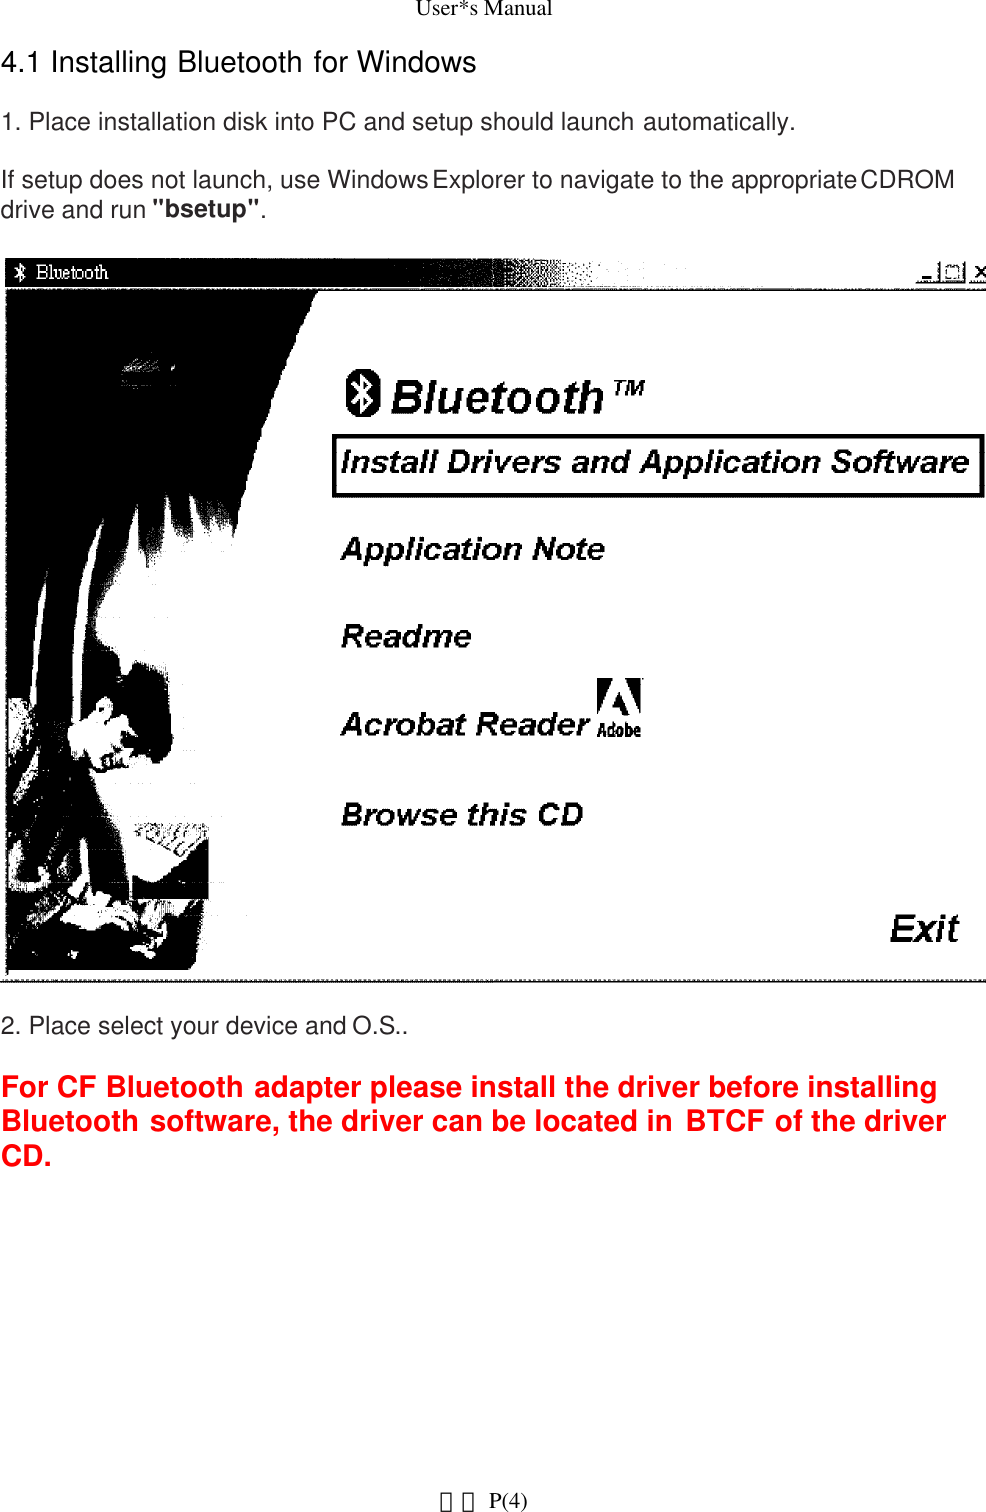 User*s Manual4.1 Installing Bluetooth for Windows1. Place installation disk into PC and setup should launch automatically. If setup does not launch, use Windows Explorer to navigate to the appropriate CDROM drive and run &quot;bsetup&quot;.2. Place select your device and O.S..For CF Bluetooth adapter please install the driver before installing Bluetooth software, the driver can be located in BTCF of the driver CD.   P(4)網頁